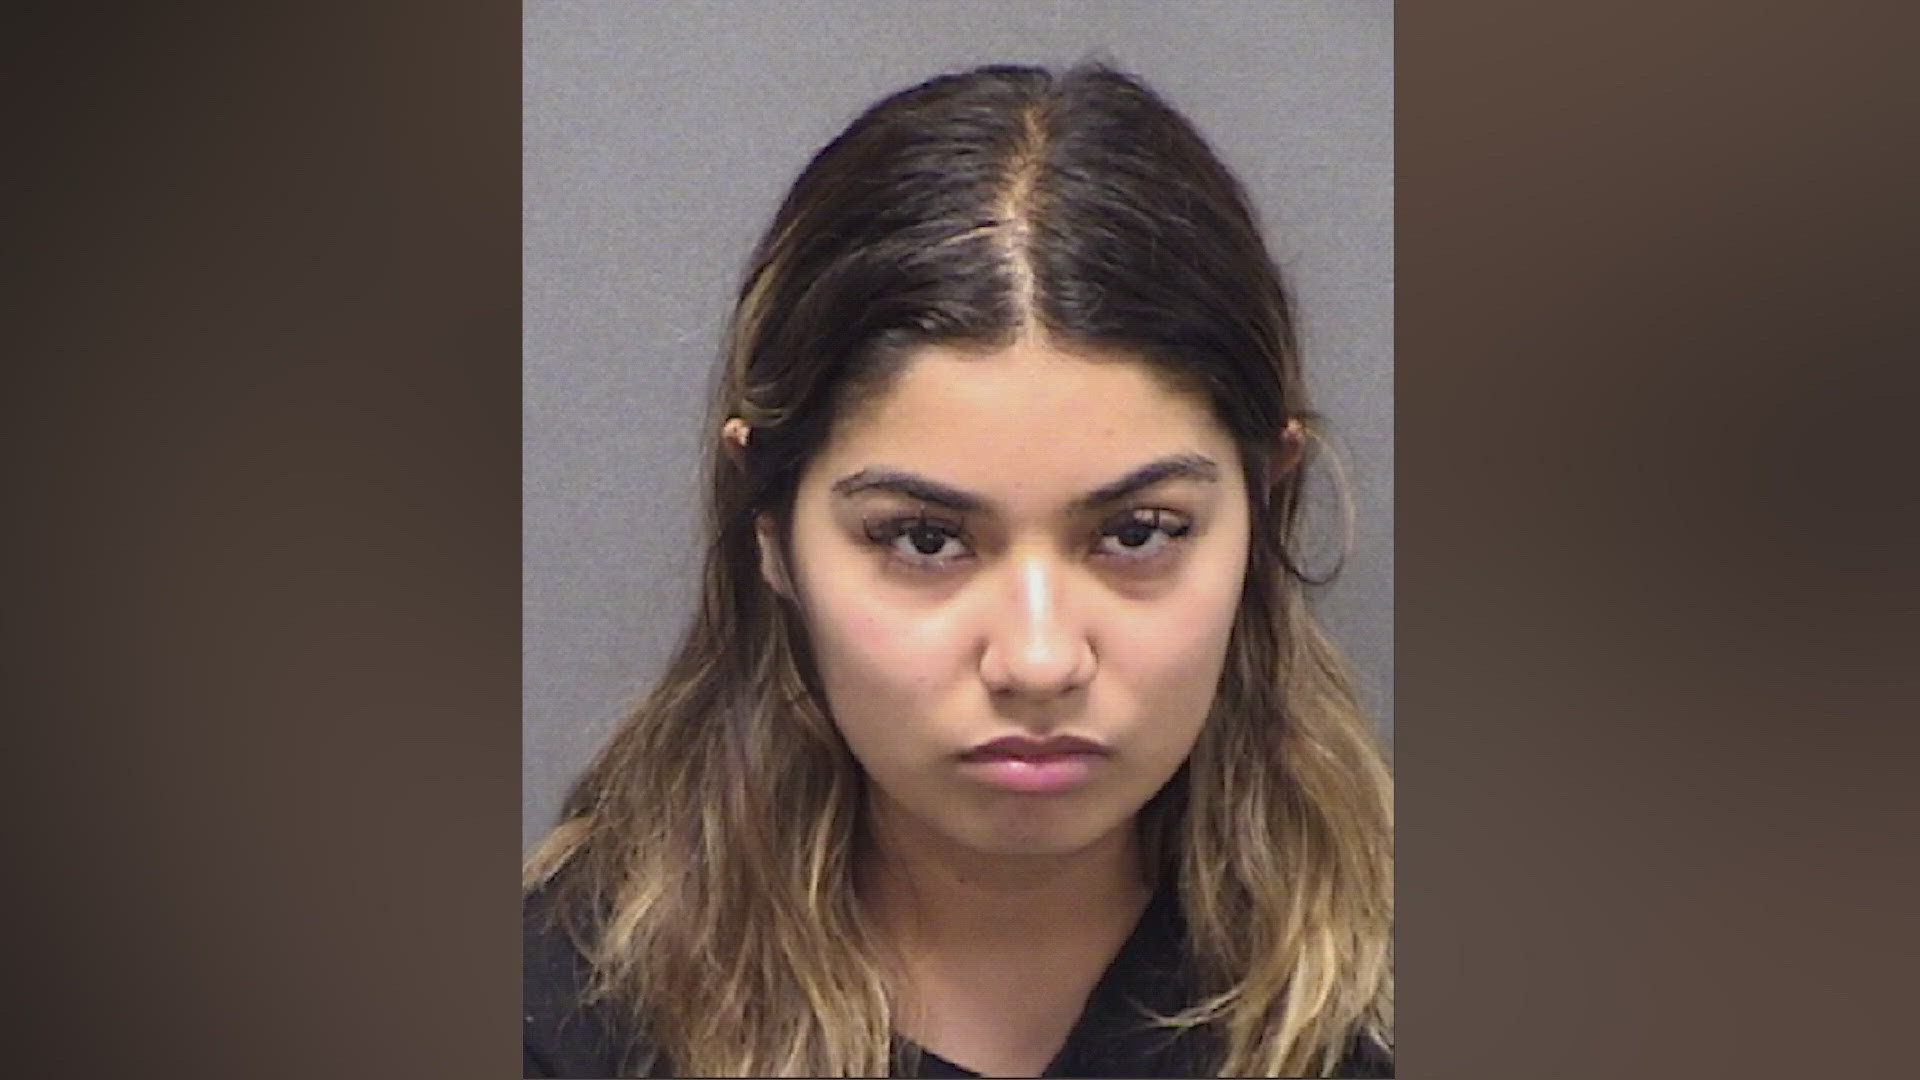 H-E-B employee accused of bomb threats, sending disturbing to coworkers photos